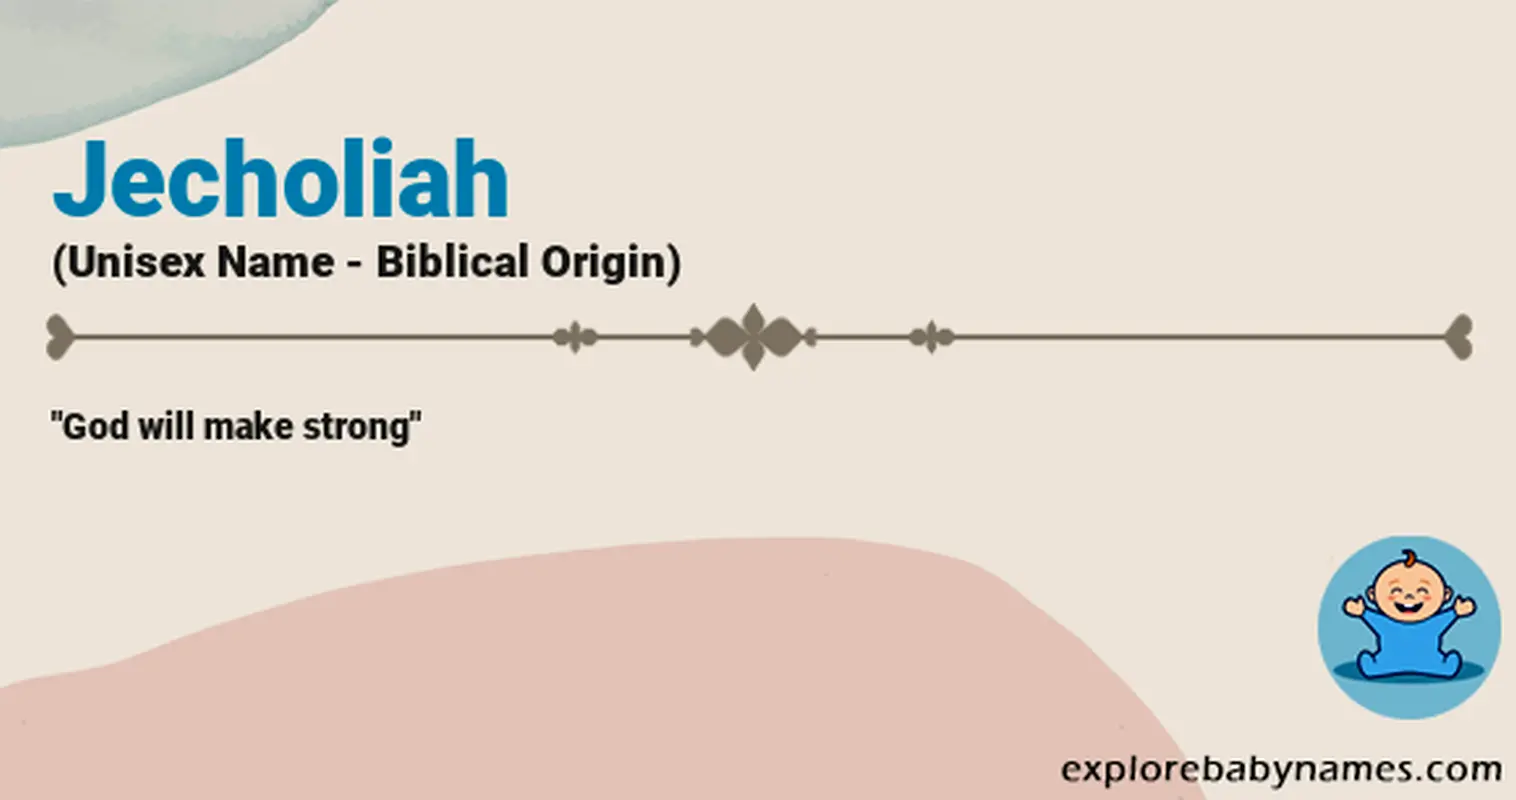 Meaning of Jecholiah